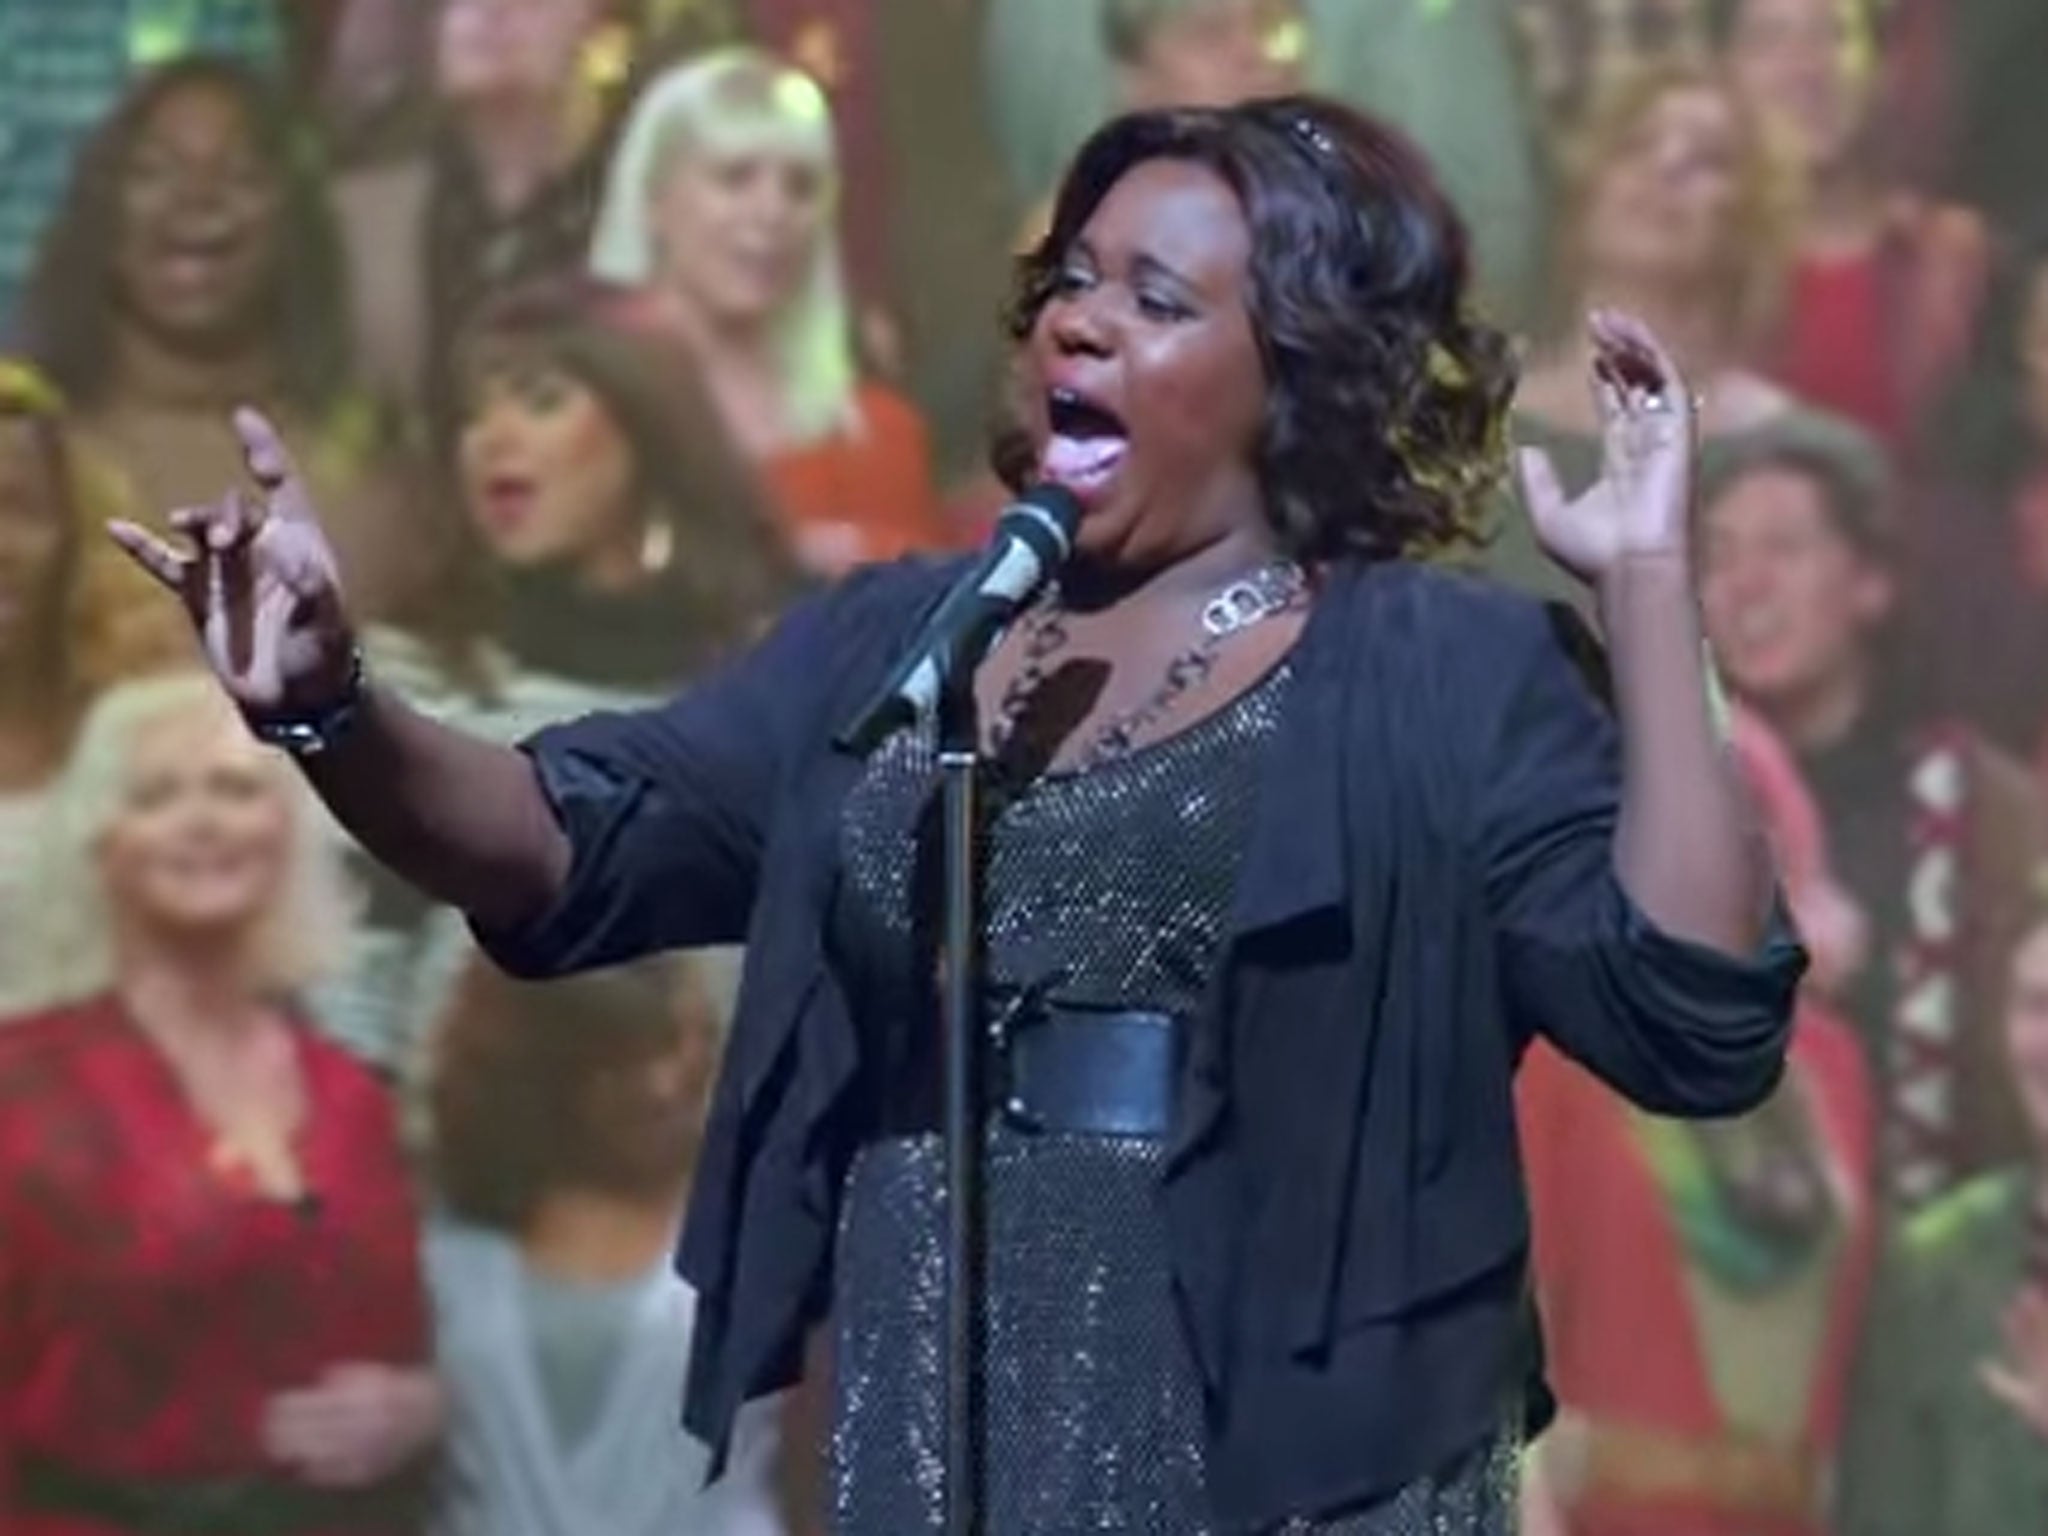 Unique (Alex Newell) performs with the choir